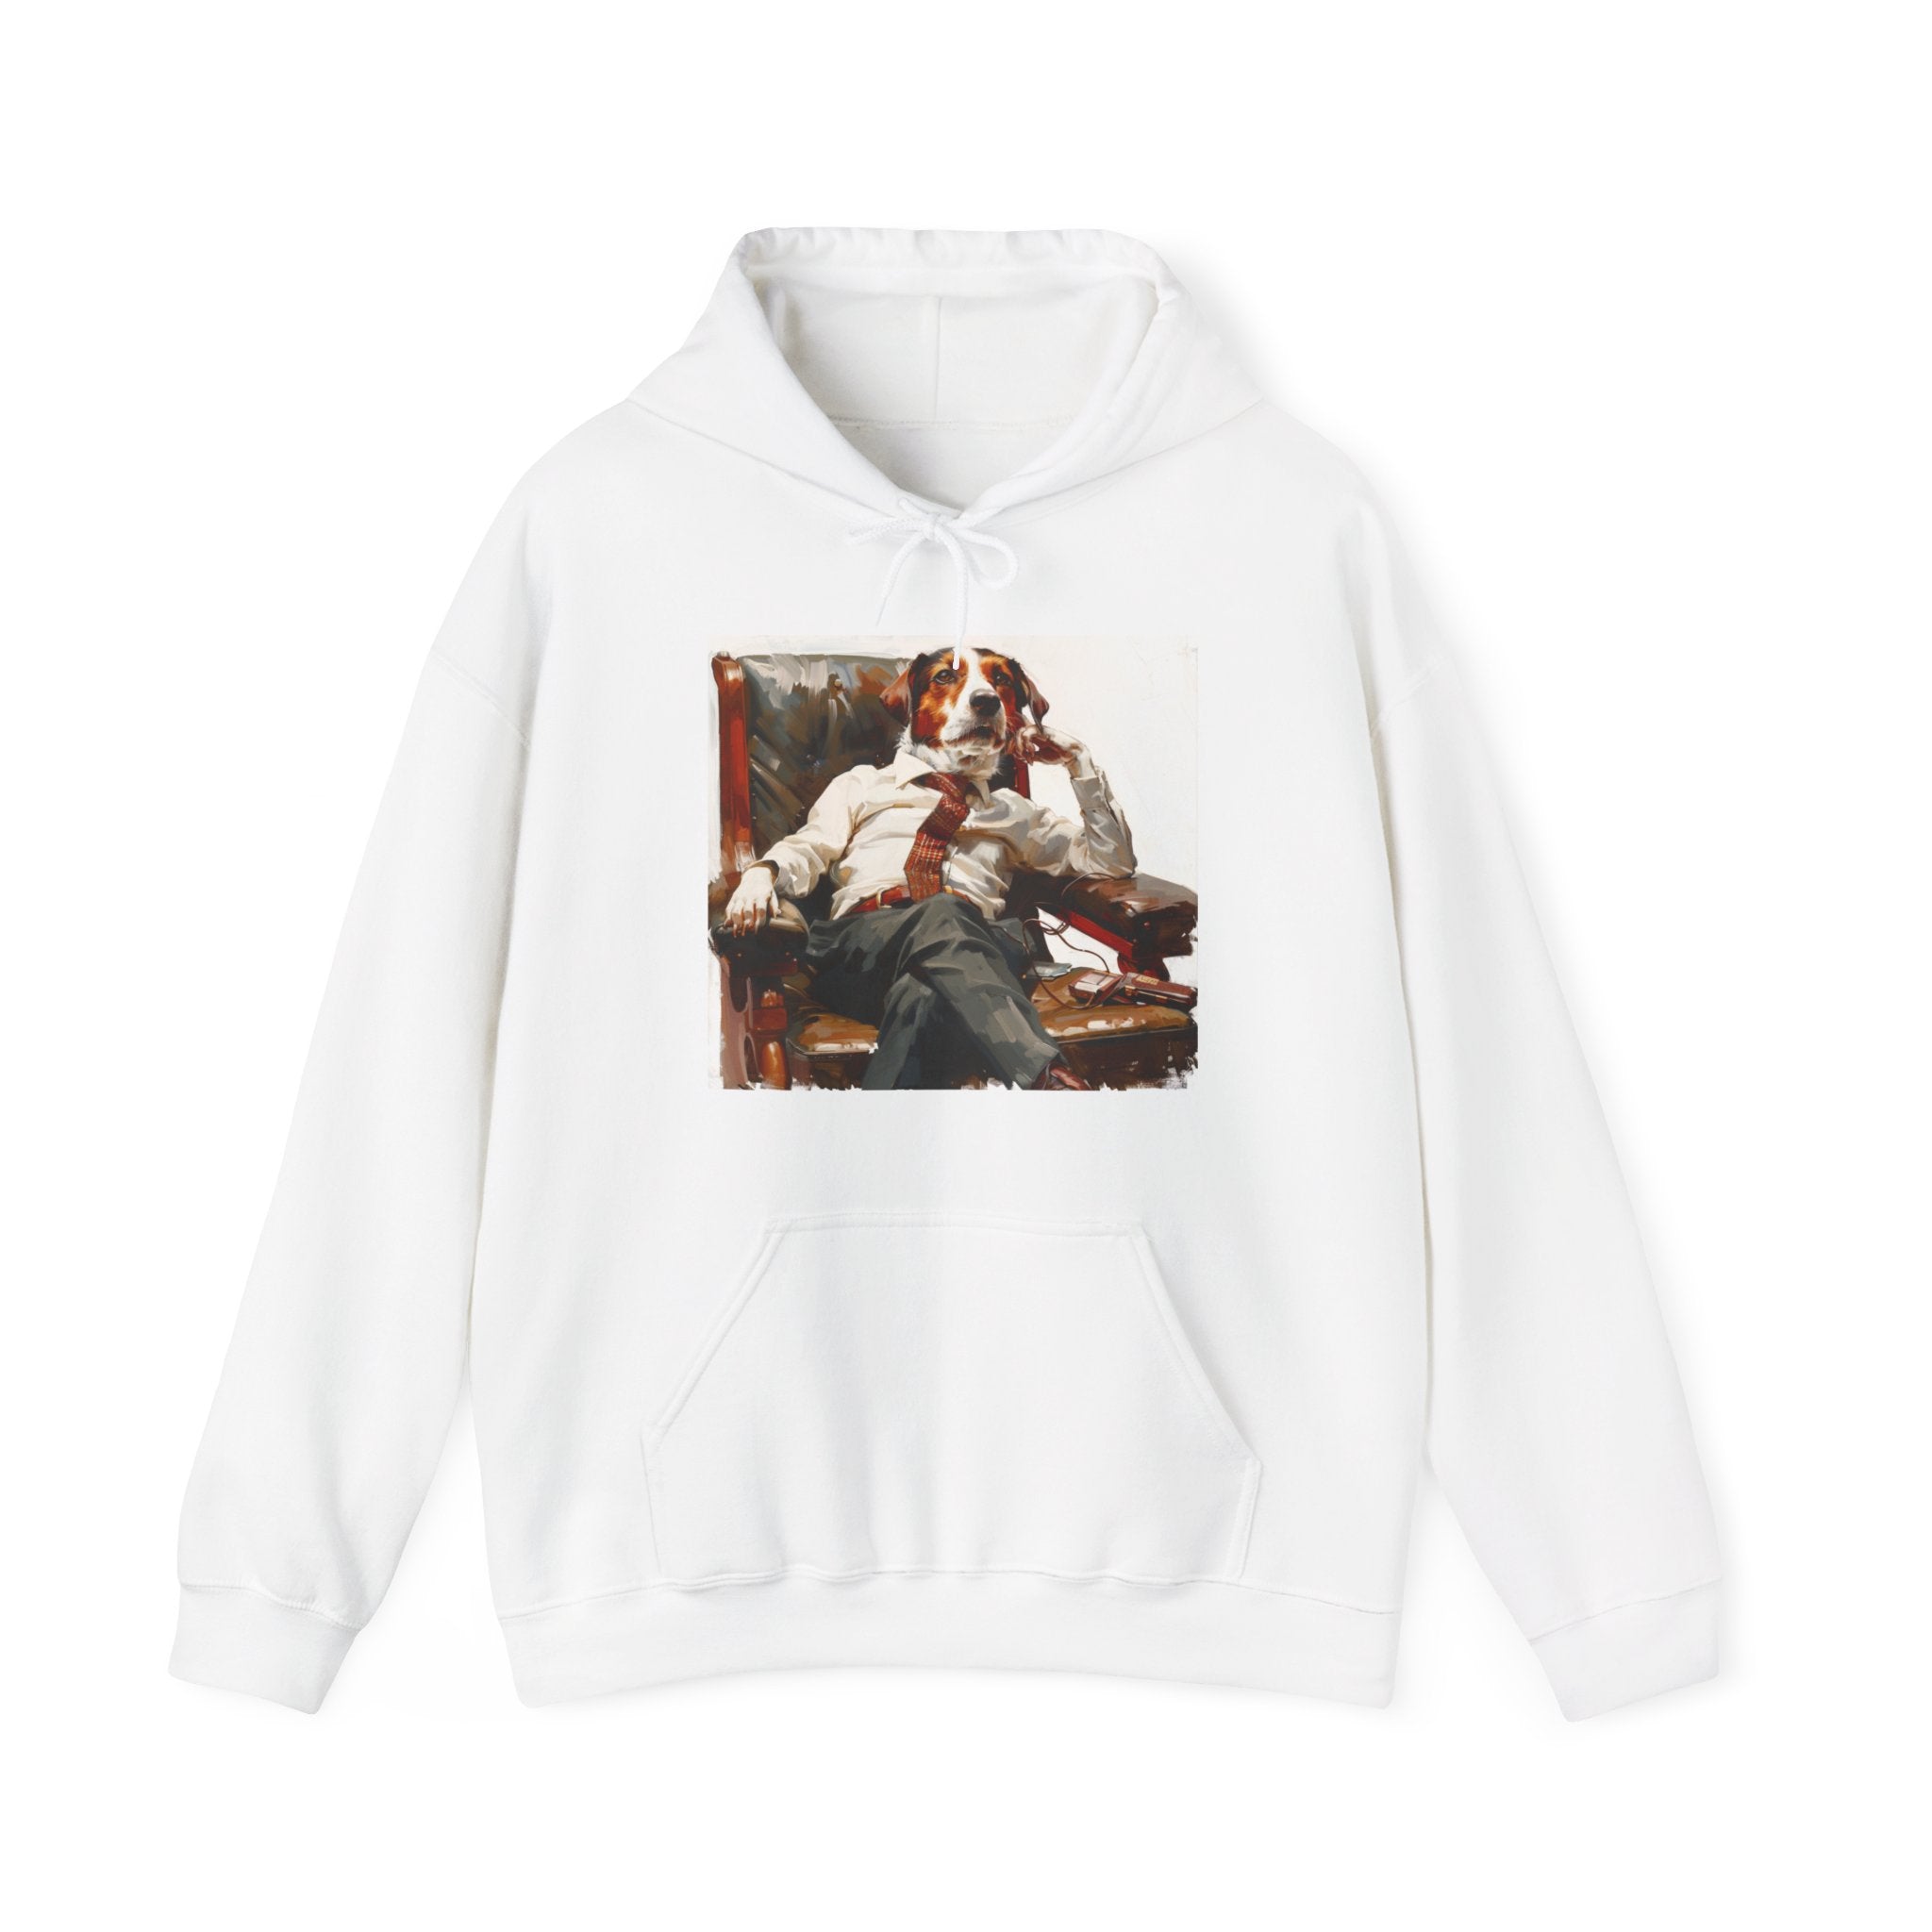 The image showcases a cozy unisex heavy blend hooded sweatshirt featuring a detailed illustration of a dog dressed as a CEO, inspired by Norman Rockwell's artistic style. The design is both humorous and sophisticated, with the hoodie’s soft, comfortable fabric and relaxed fit making it ideal for any casual occasion.